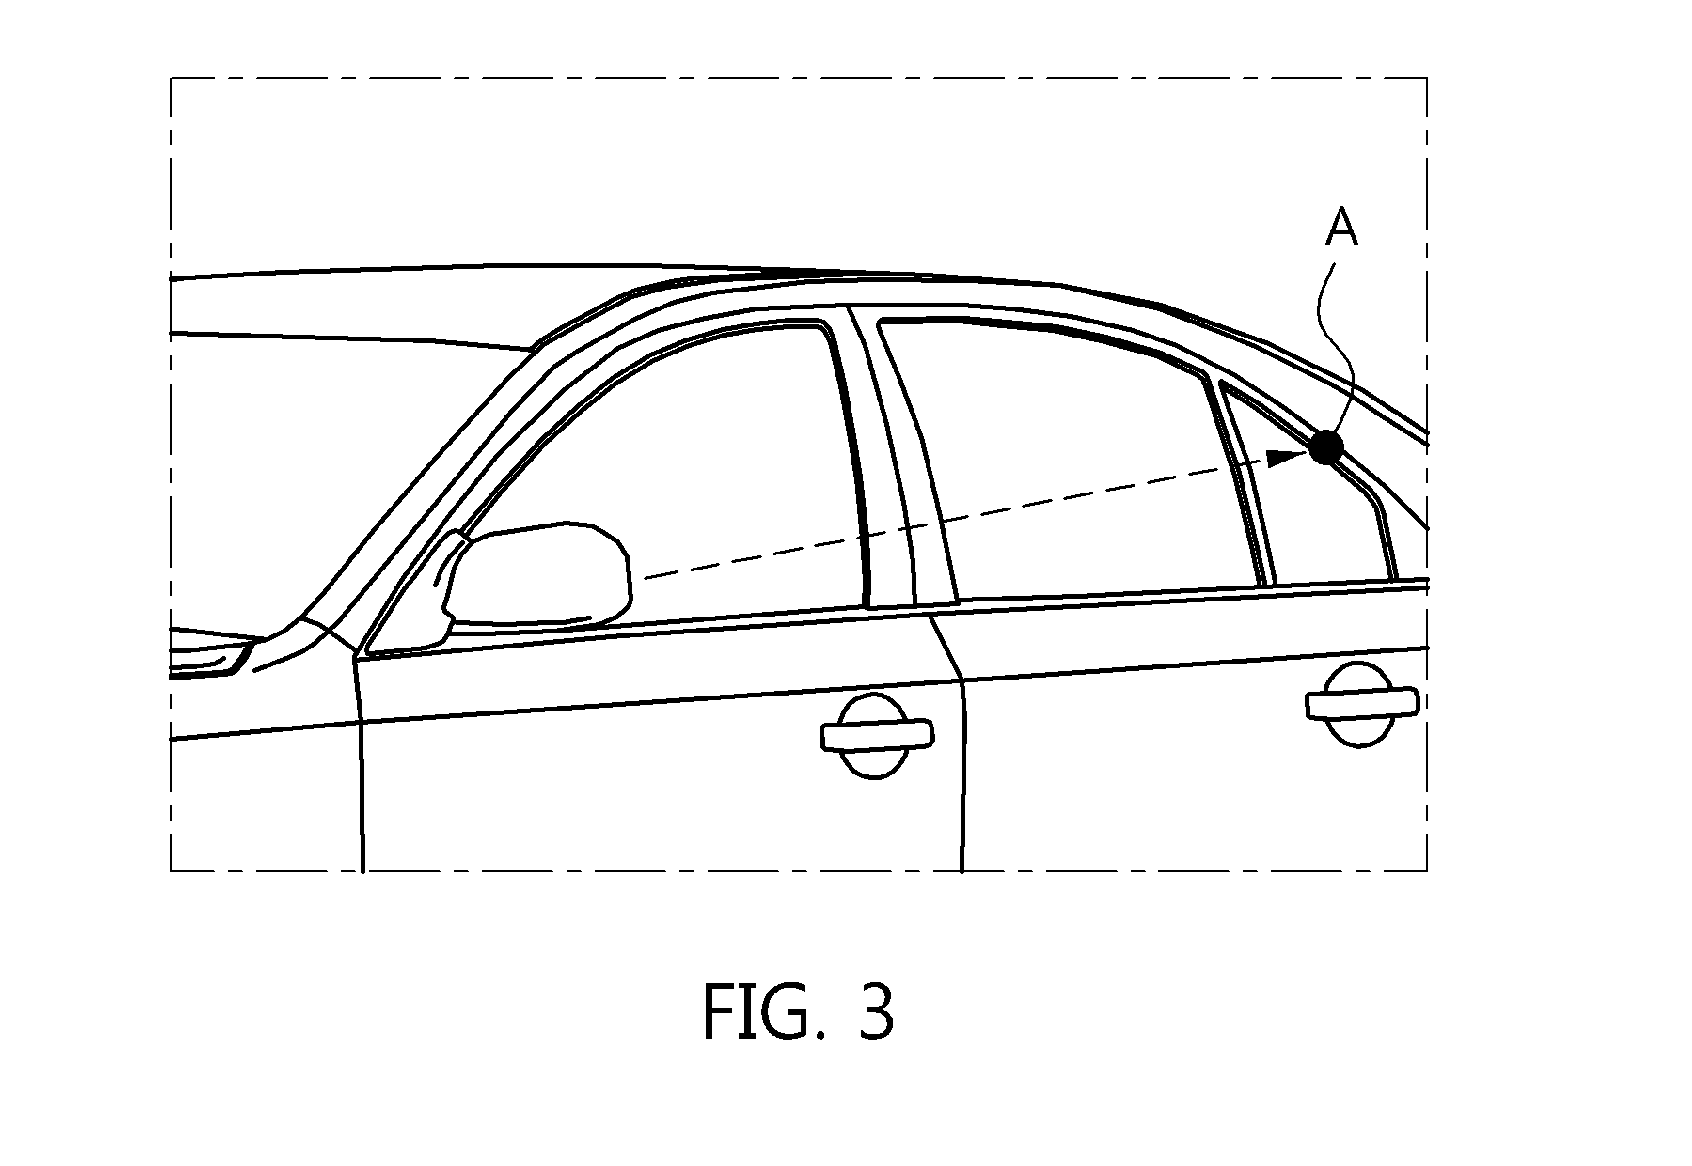 Method and apparatus for detecting intrusion into vehicle